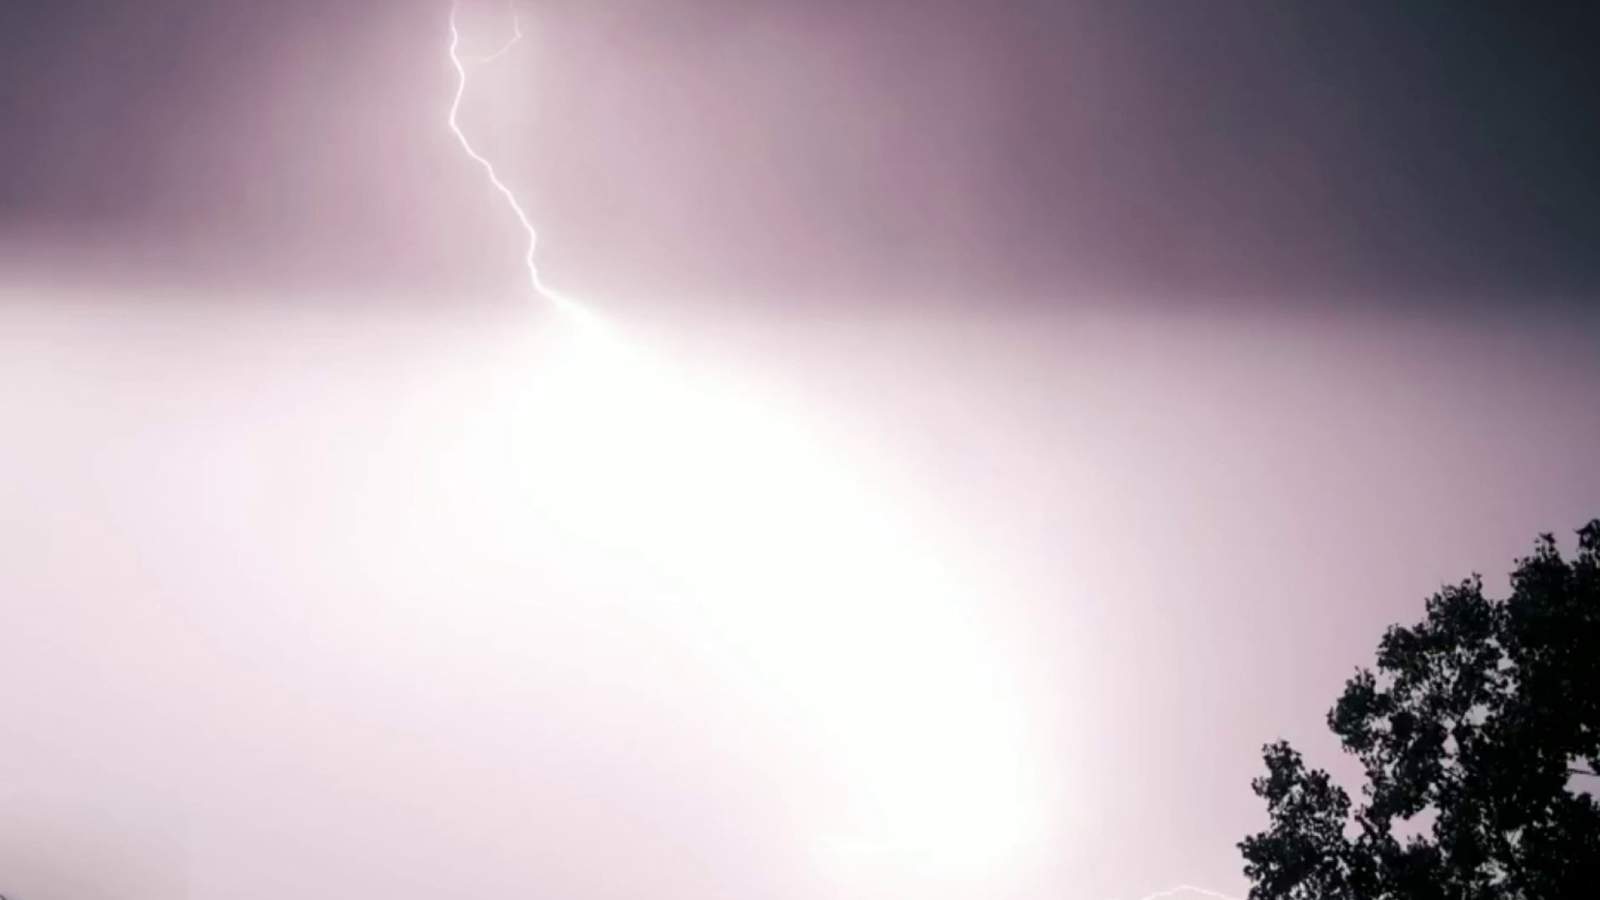 Study finds thunderstorms linked to respiratory illnesses